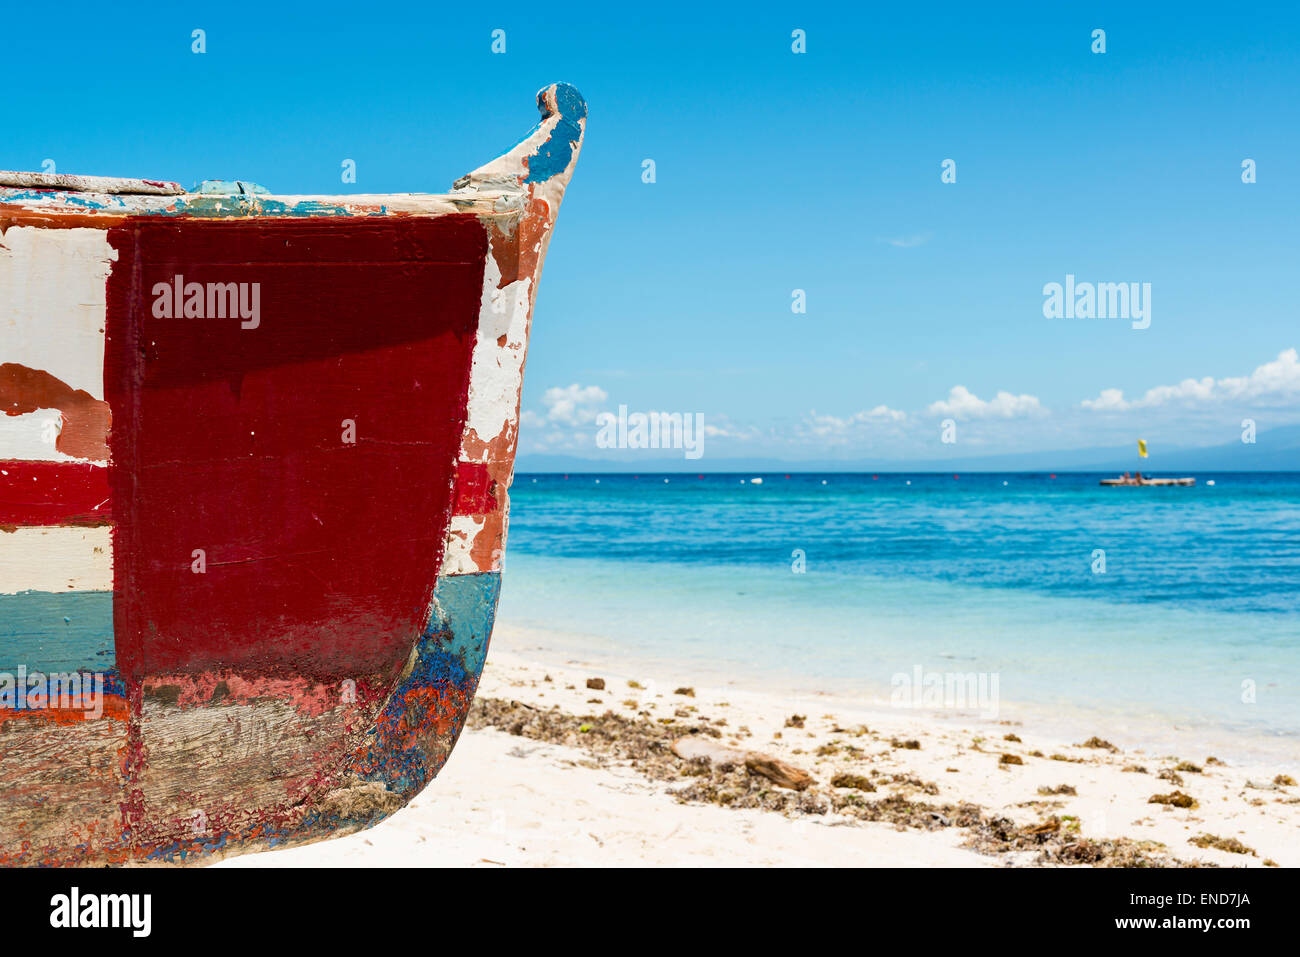 Bough of a wooden fishing boat with the azure ocean in the background Stock Photo